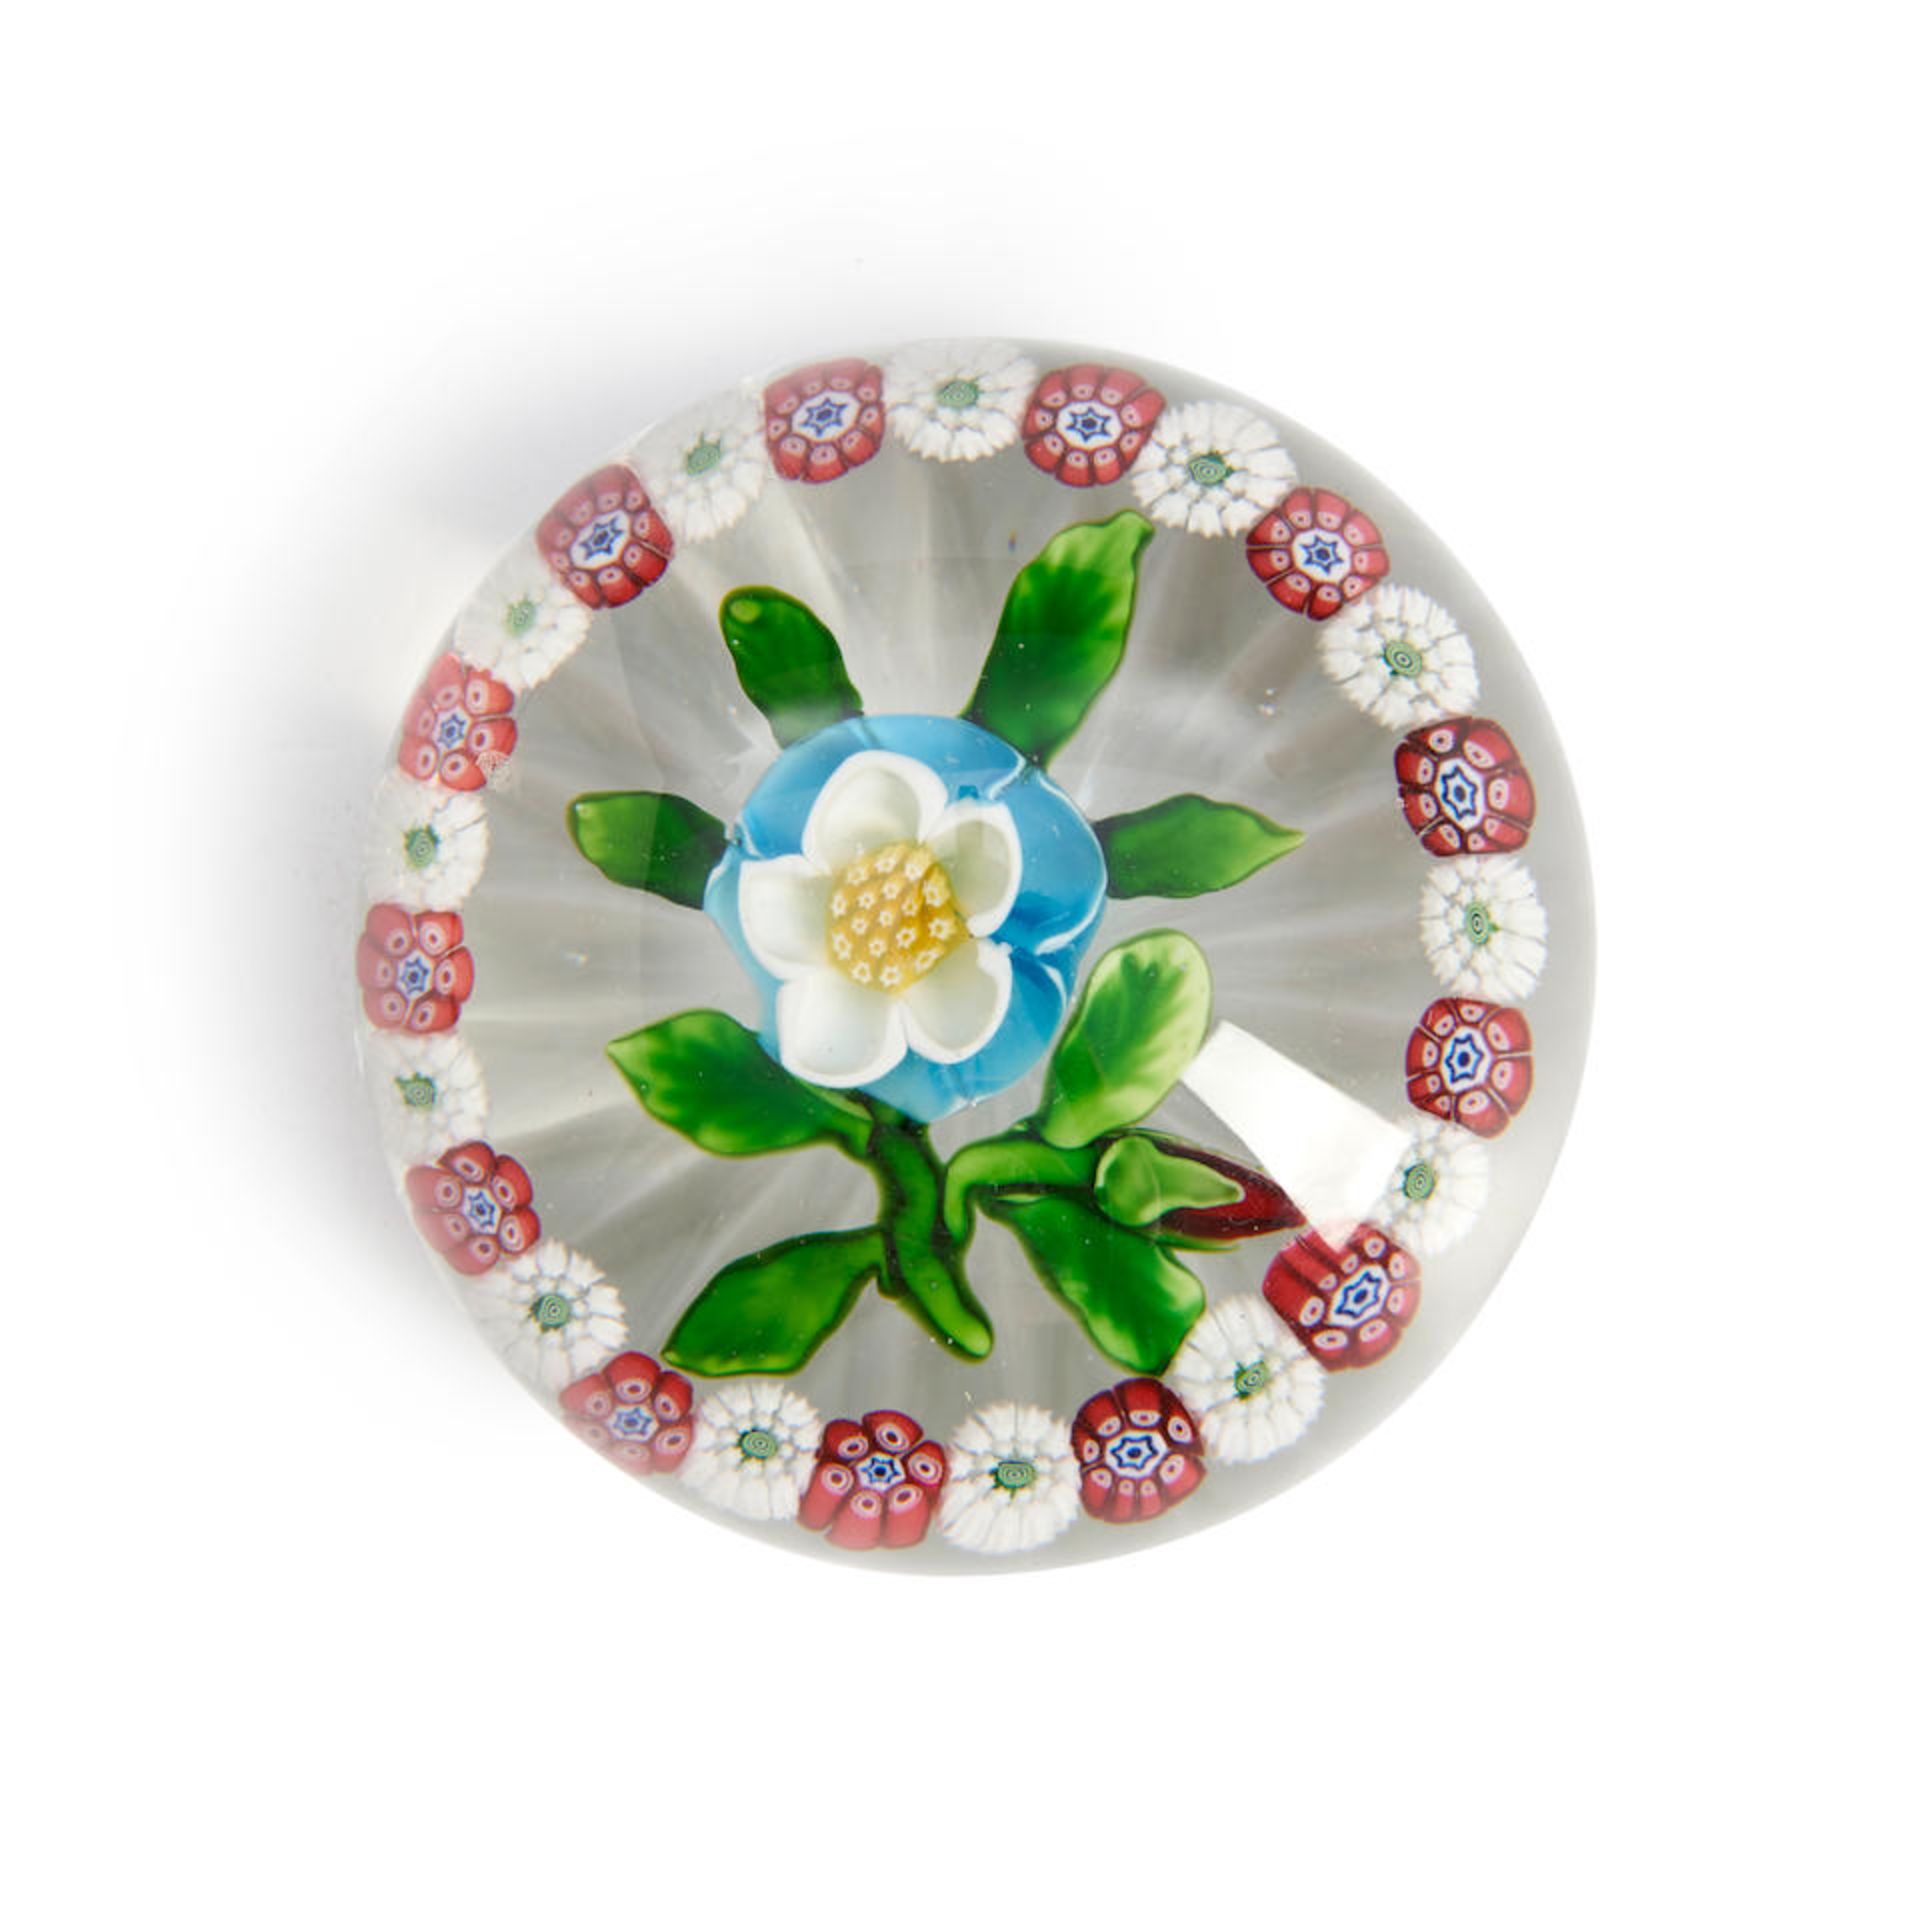 BACCARAT GARLANDED TURQUOISE BUTTERCUP GLASS PAPERWEIGHT, France, ht. 2, dia. 2 3/4 in.